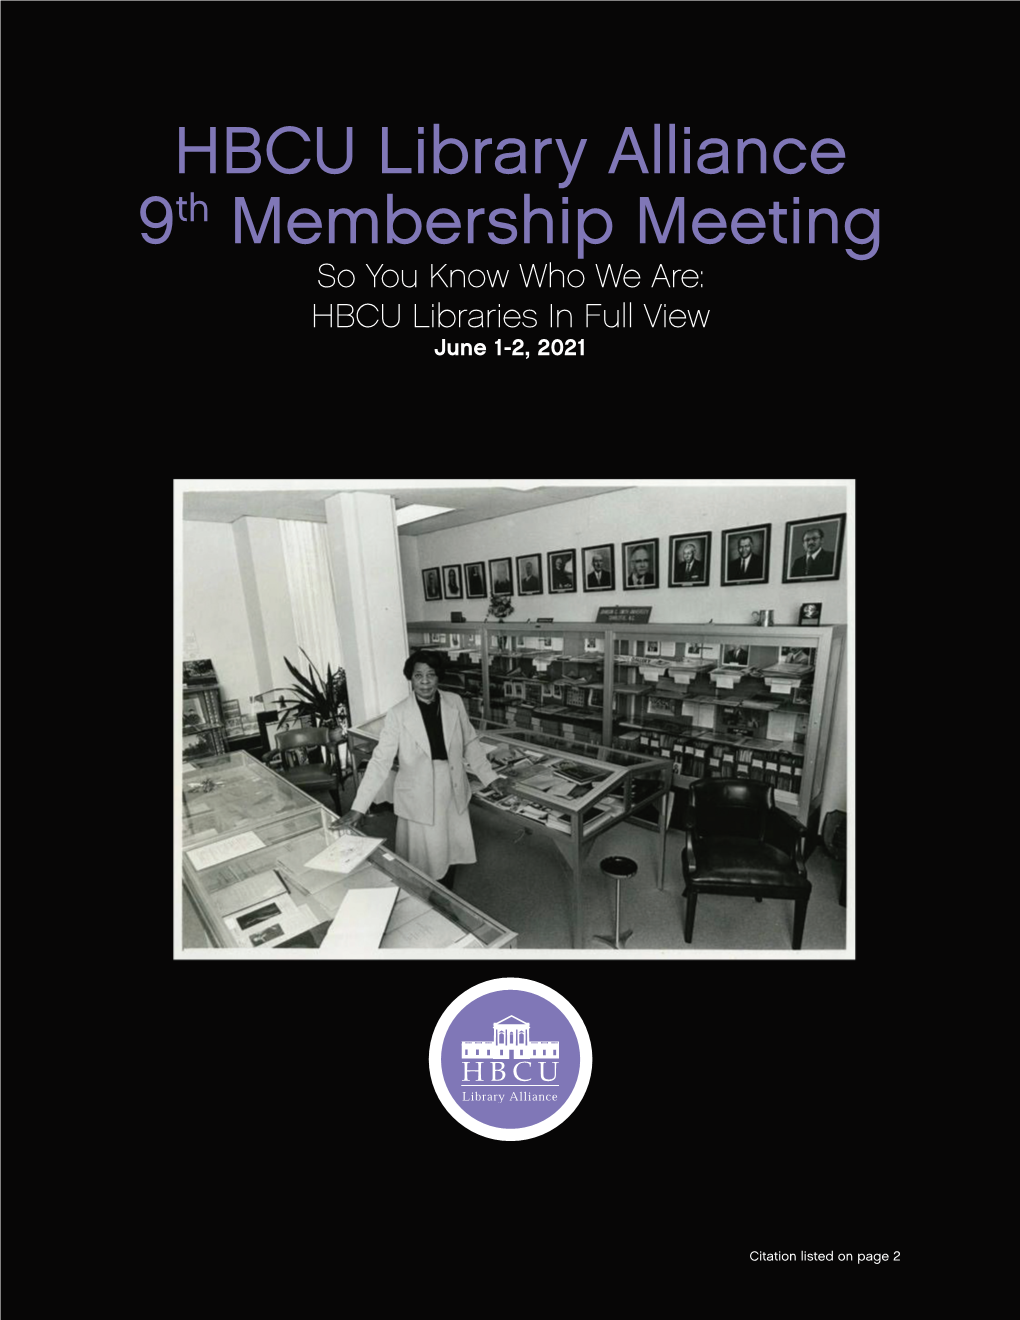 HBCU Library Alliance 9Th Membership Meeting So You Know Who We Are: HBCU Libraries in Full View June 1-2, 2021